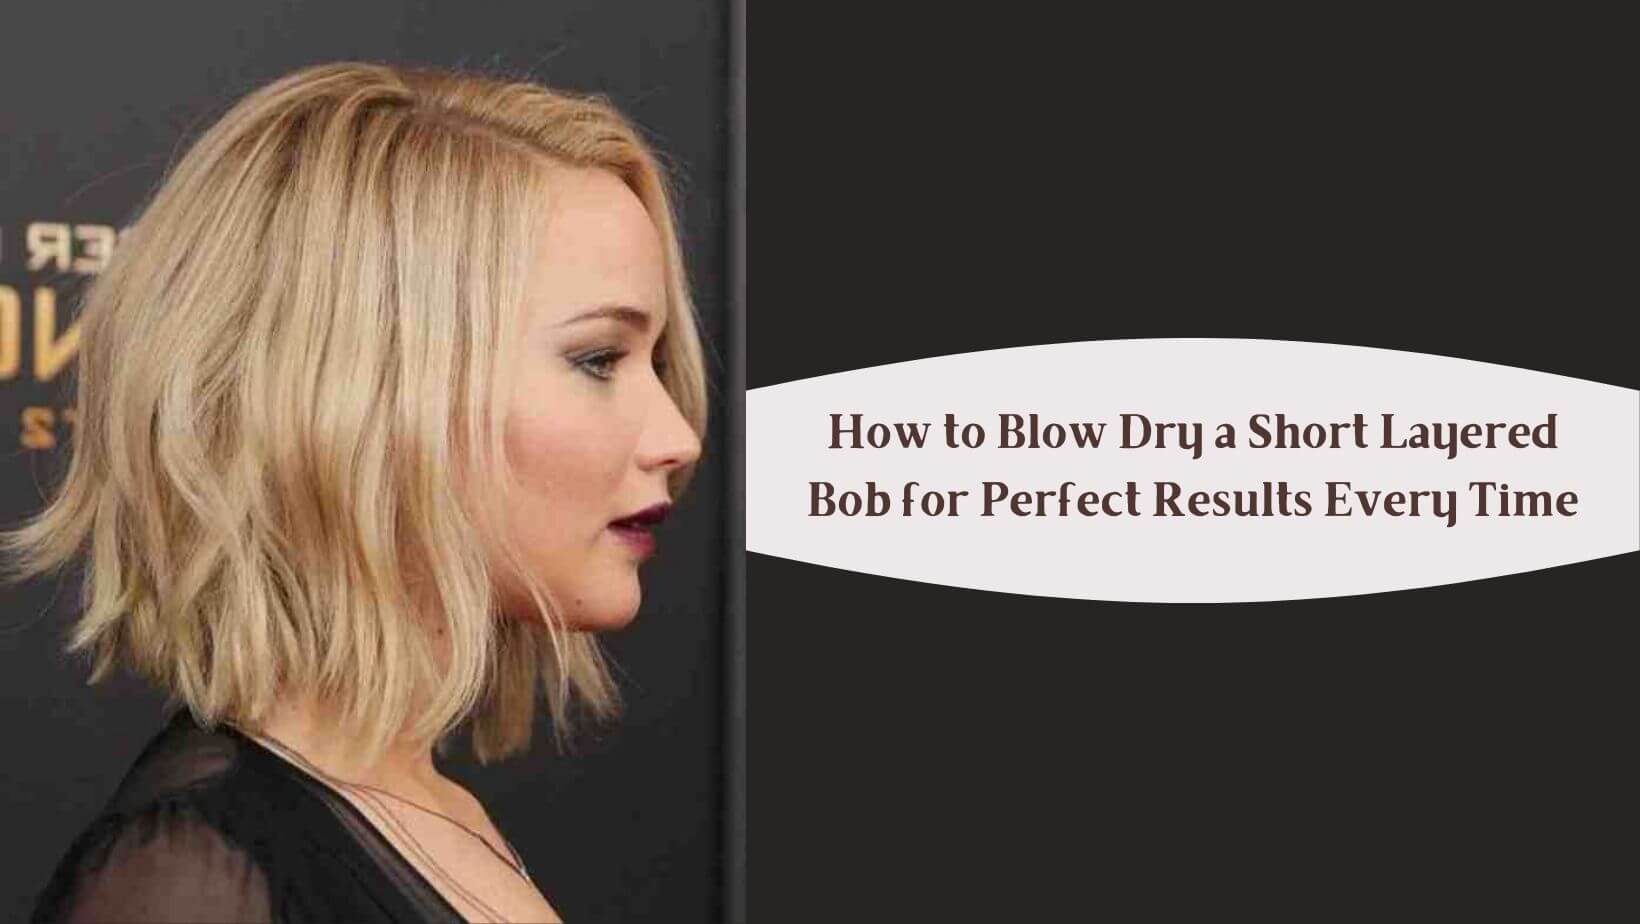 How to Blow Dry a Short Layered Bob